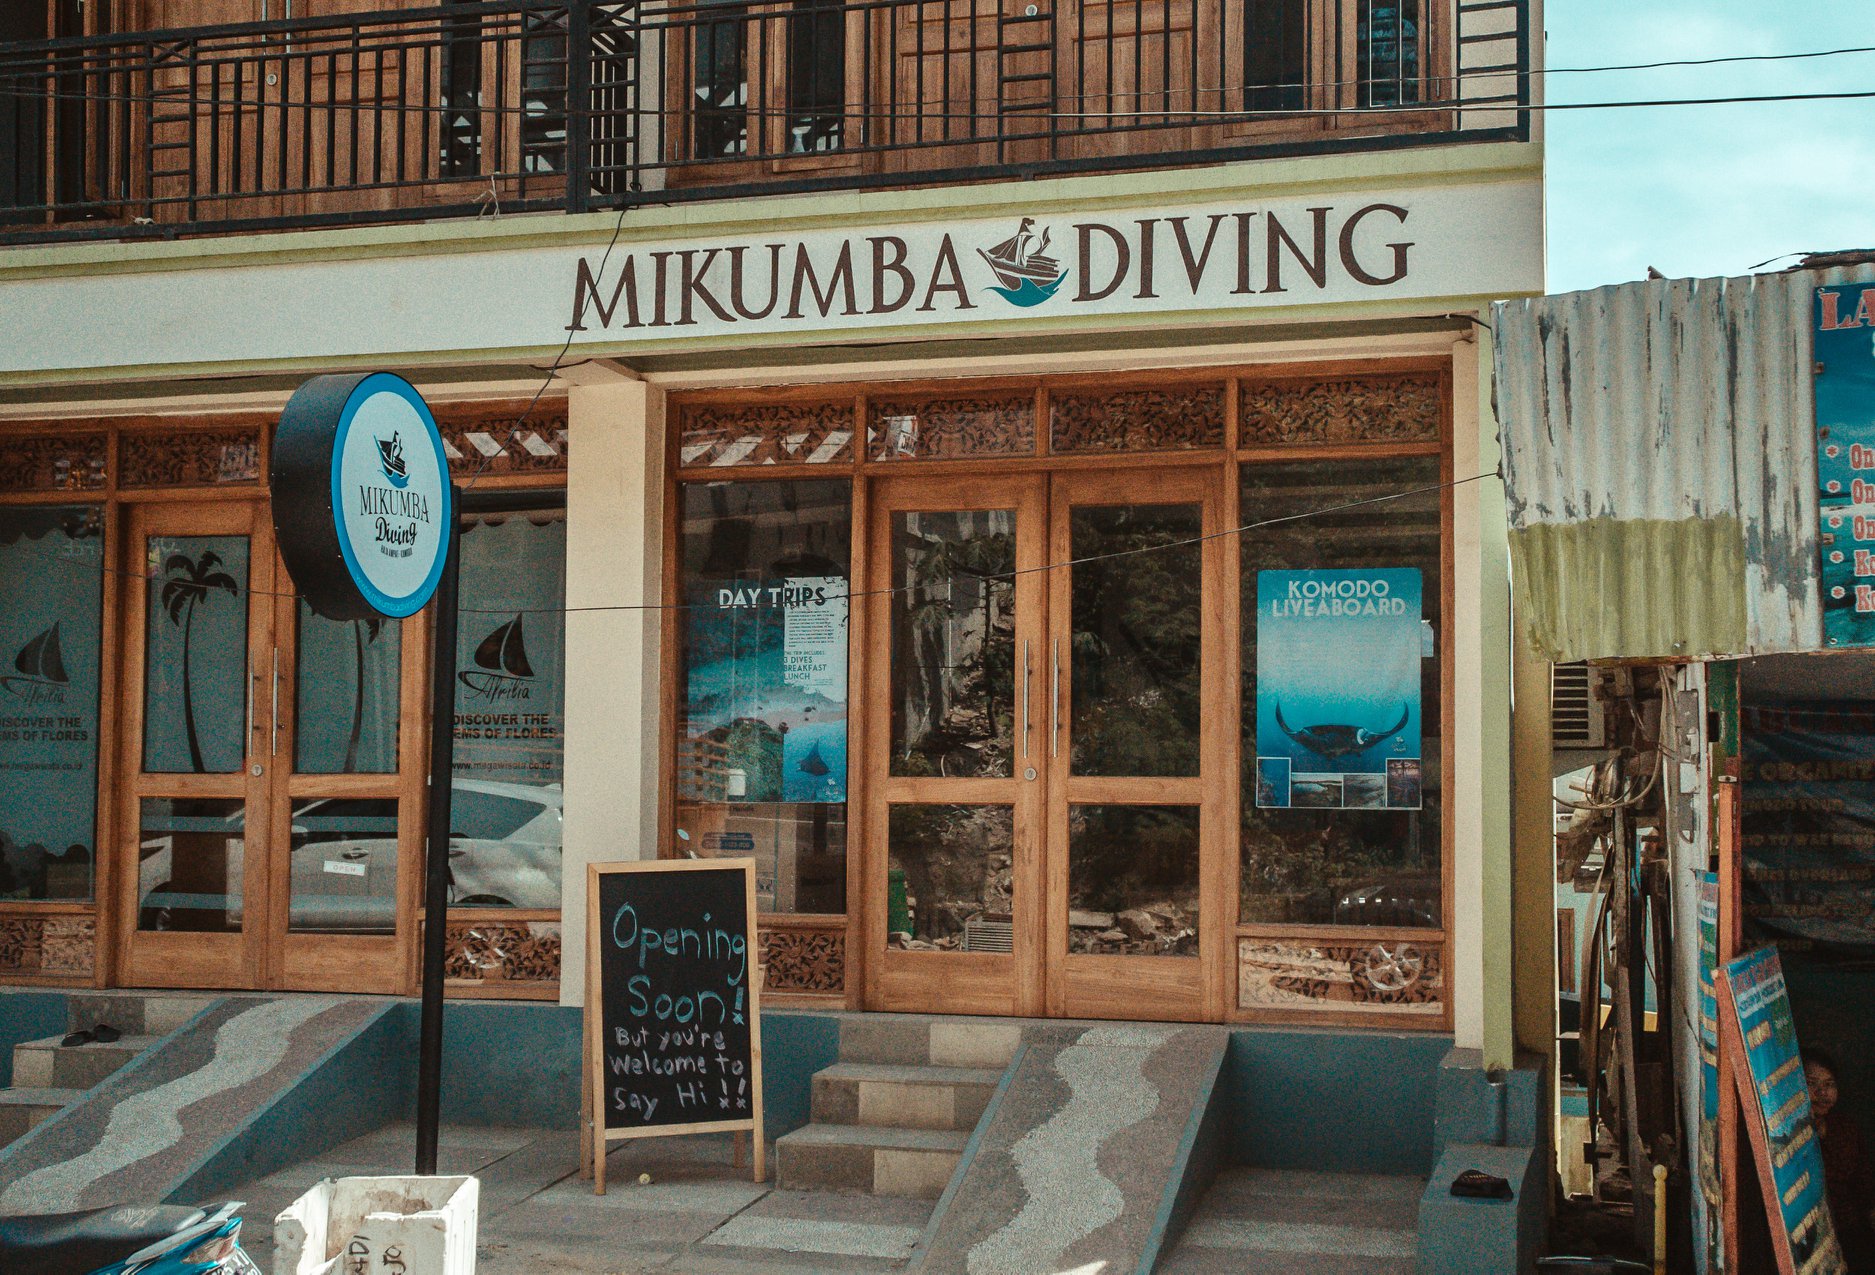 Dive Center For Sale - Looking for partner. Great opportunity in Komodo Indonesia